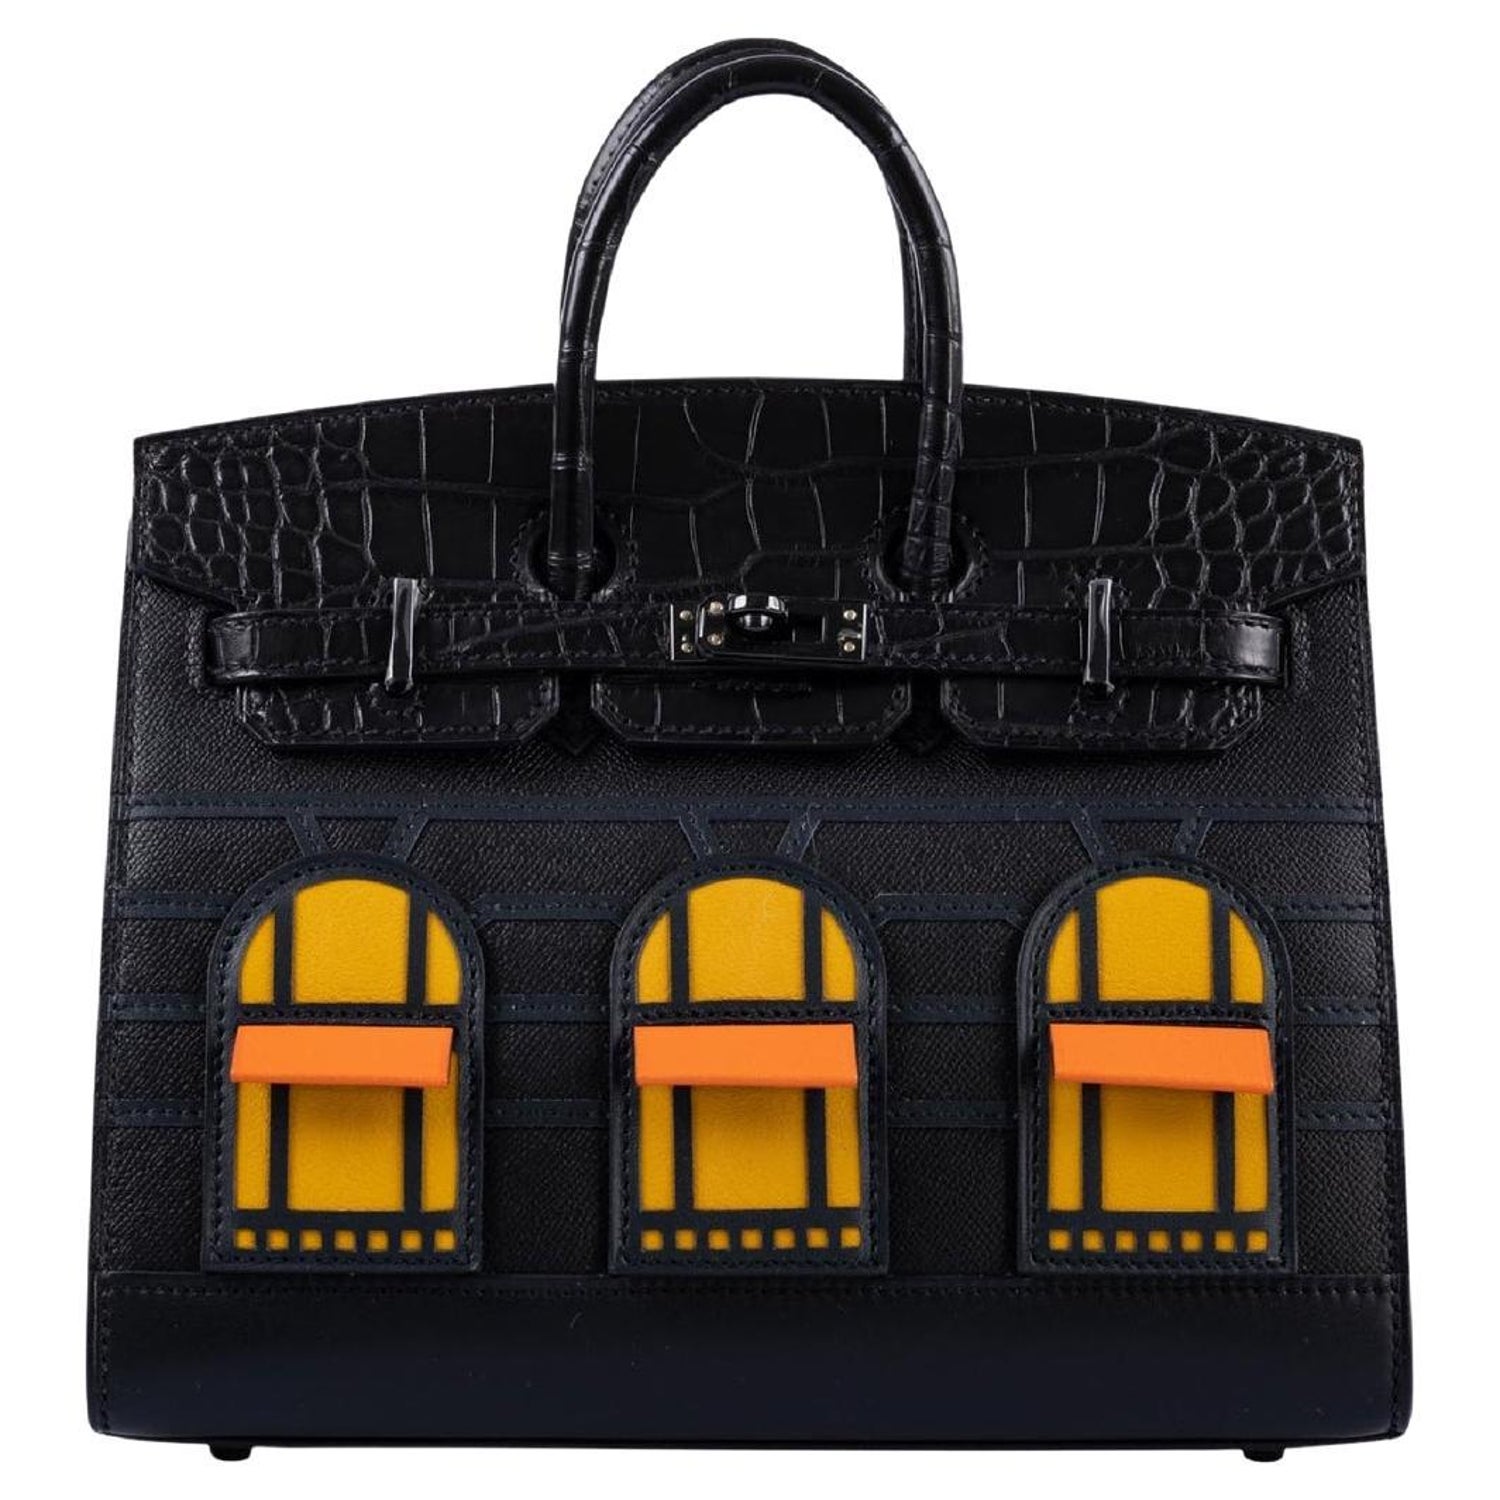 How much is a mini Birkin bag? - Questions & Answers